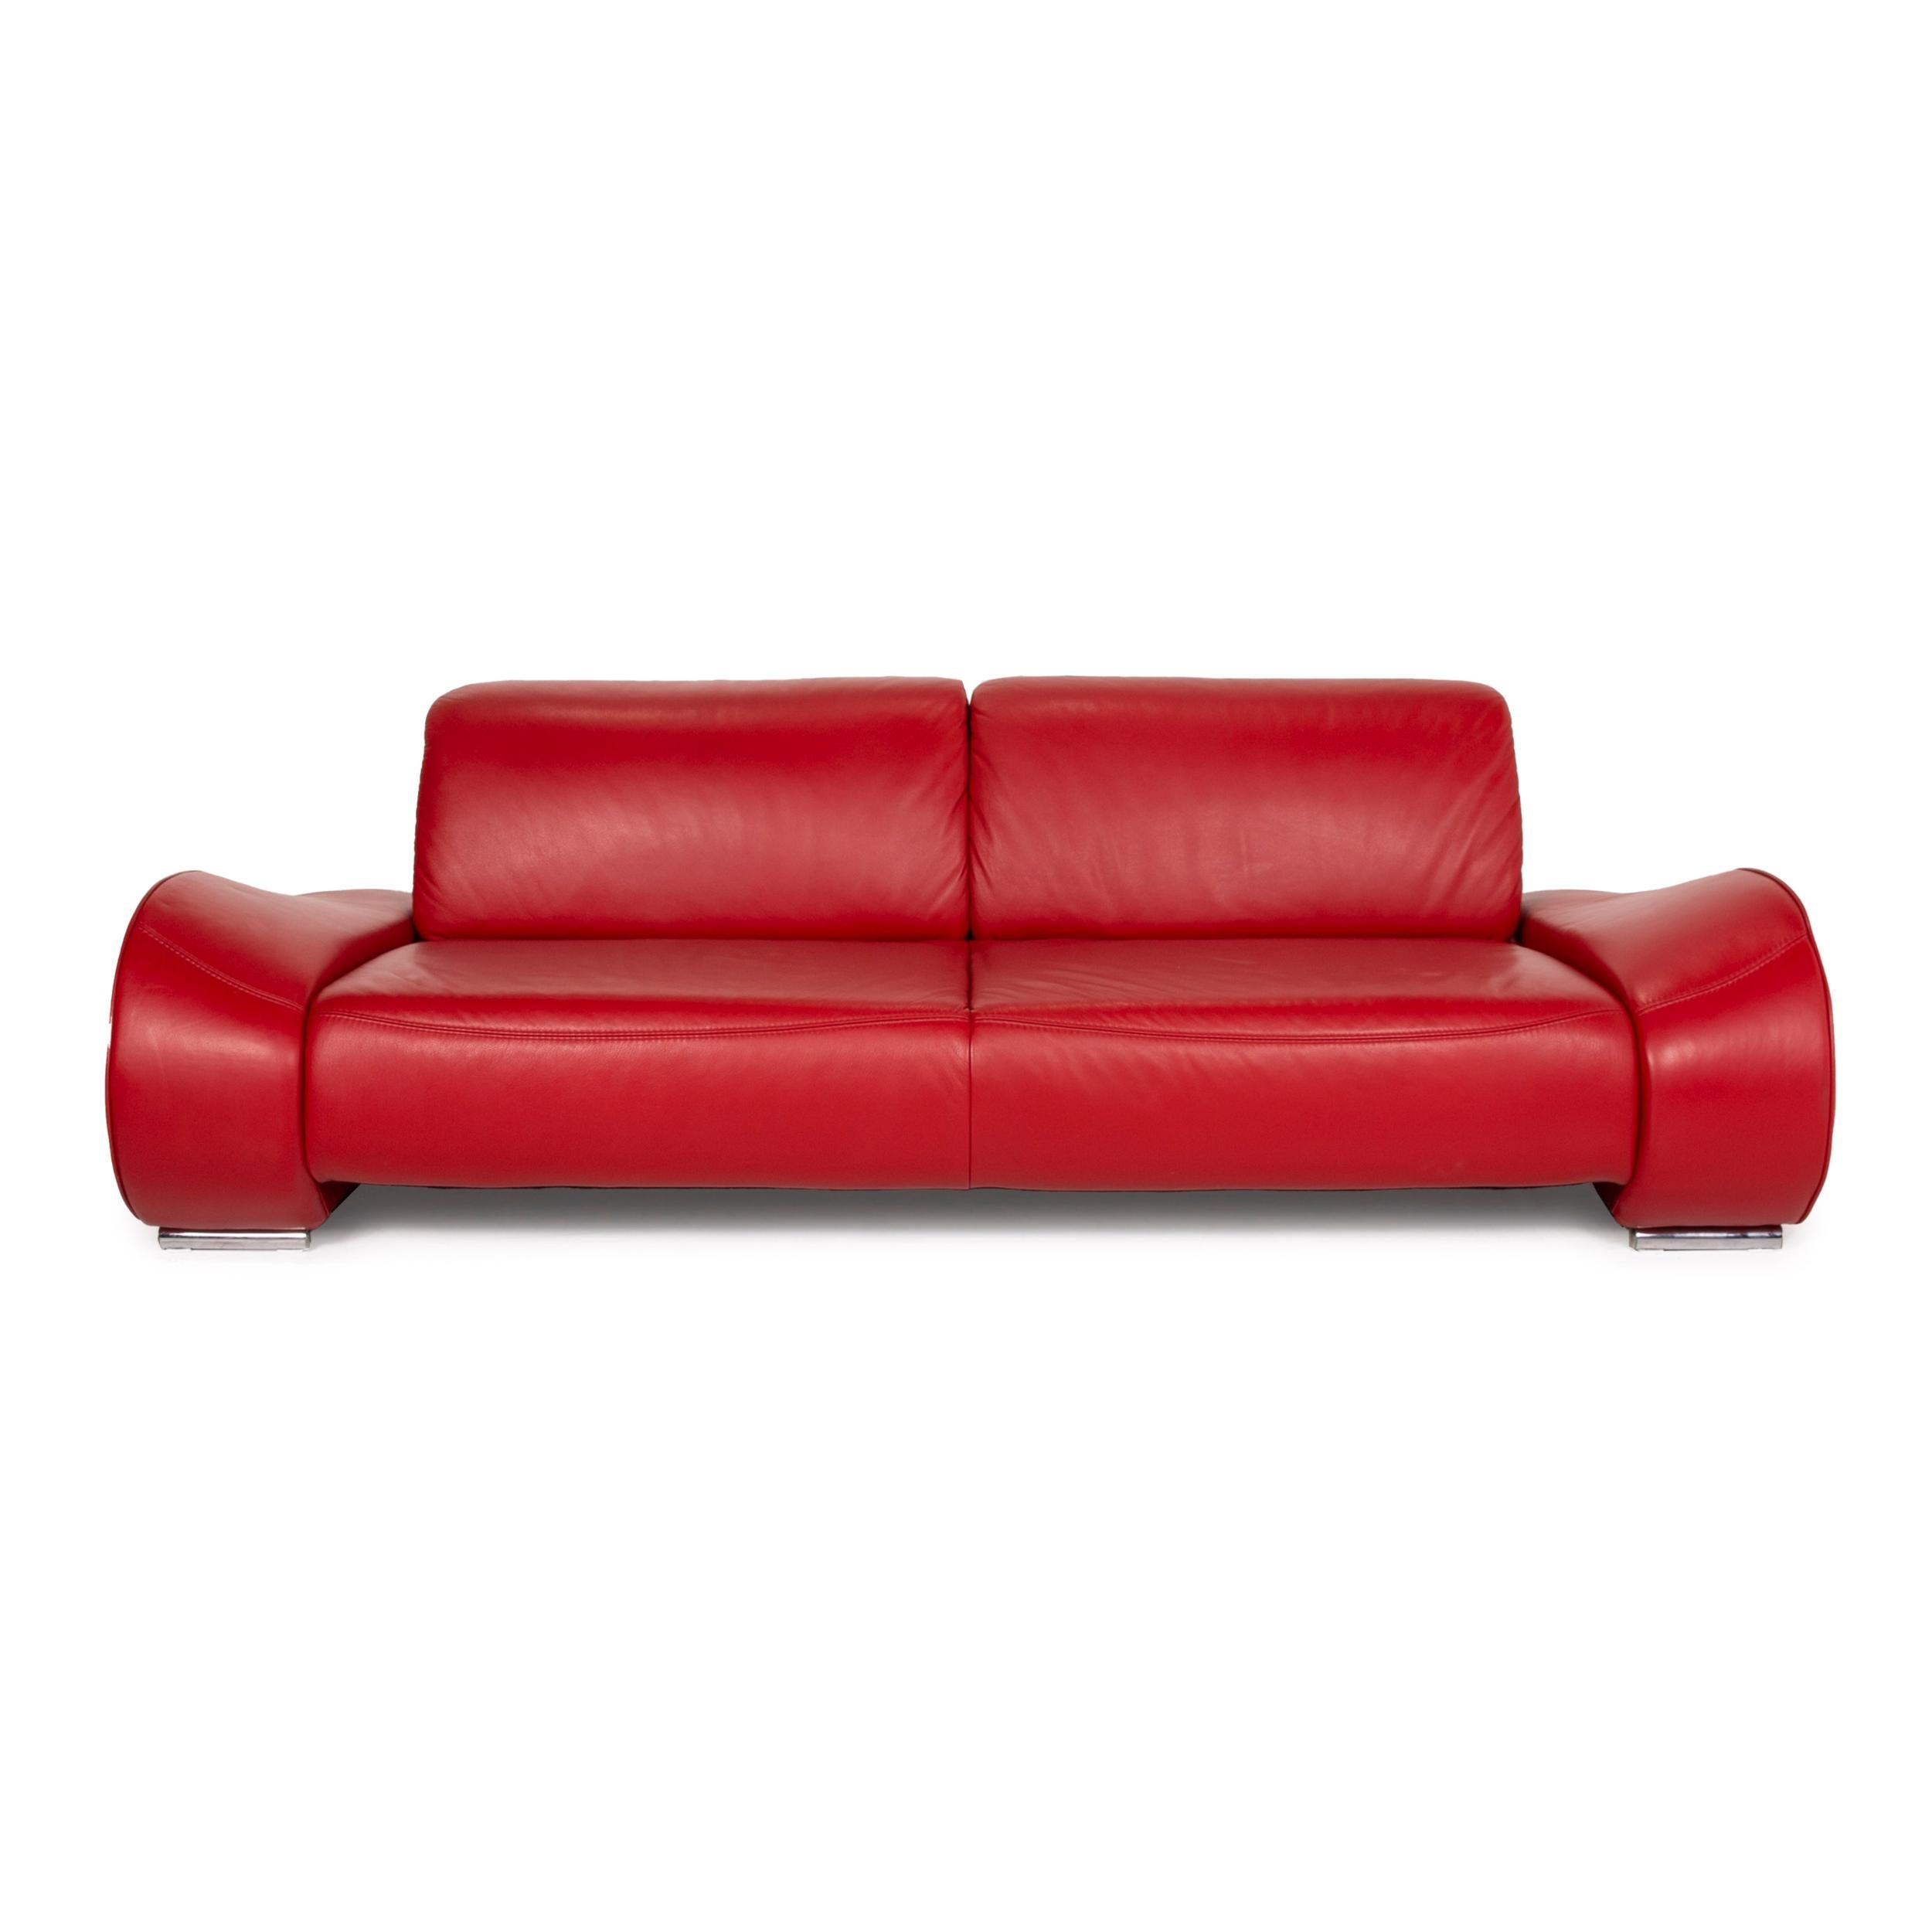 Musterring Mr-740 Leather Sofa Red Three-Seater Function 4